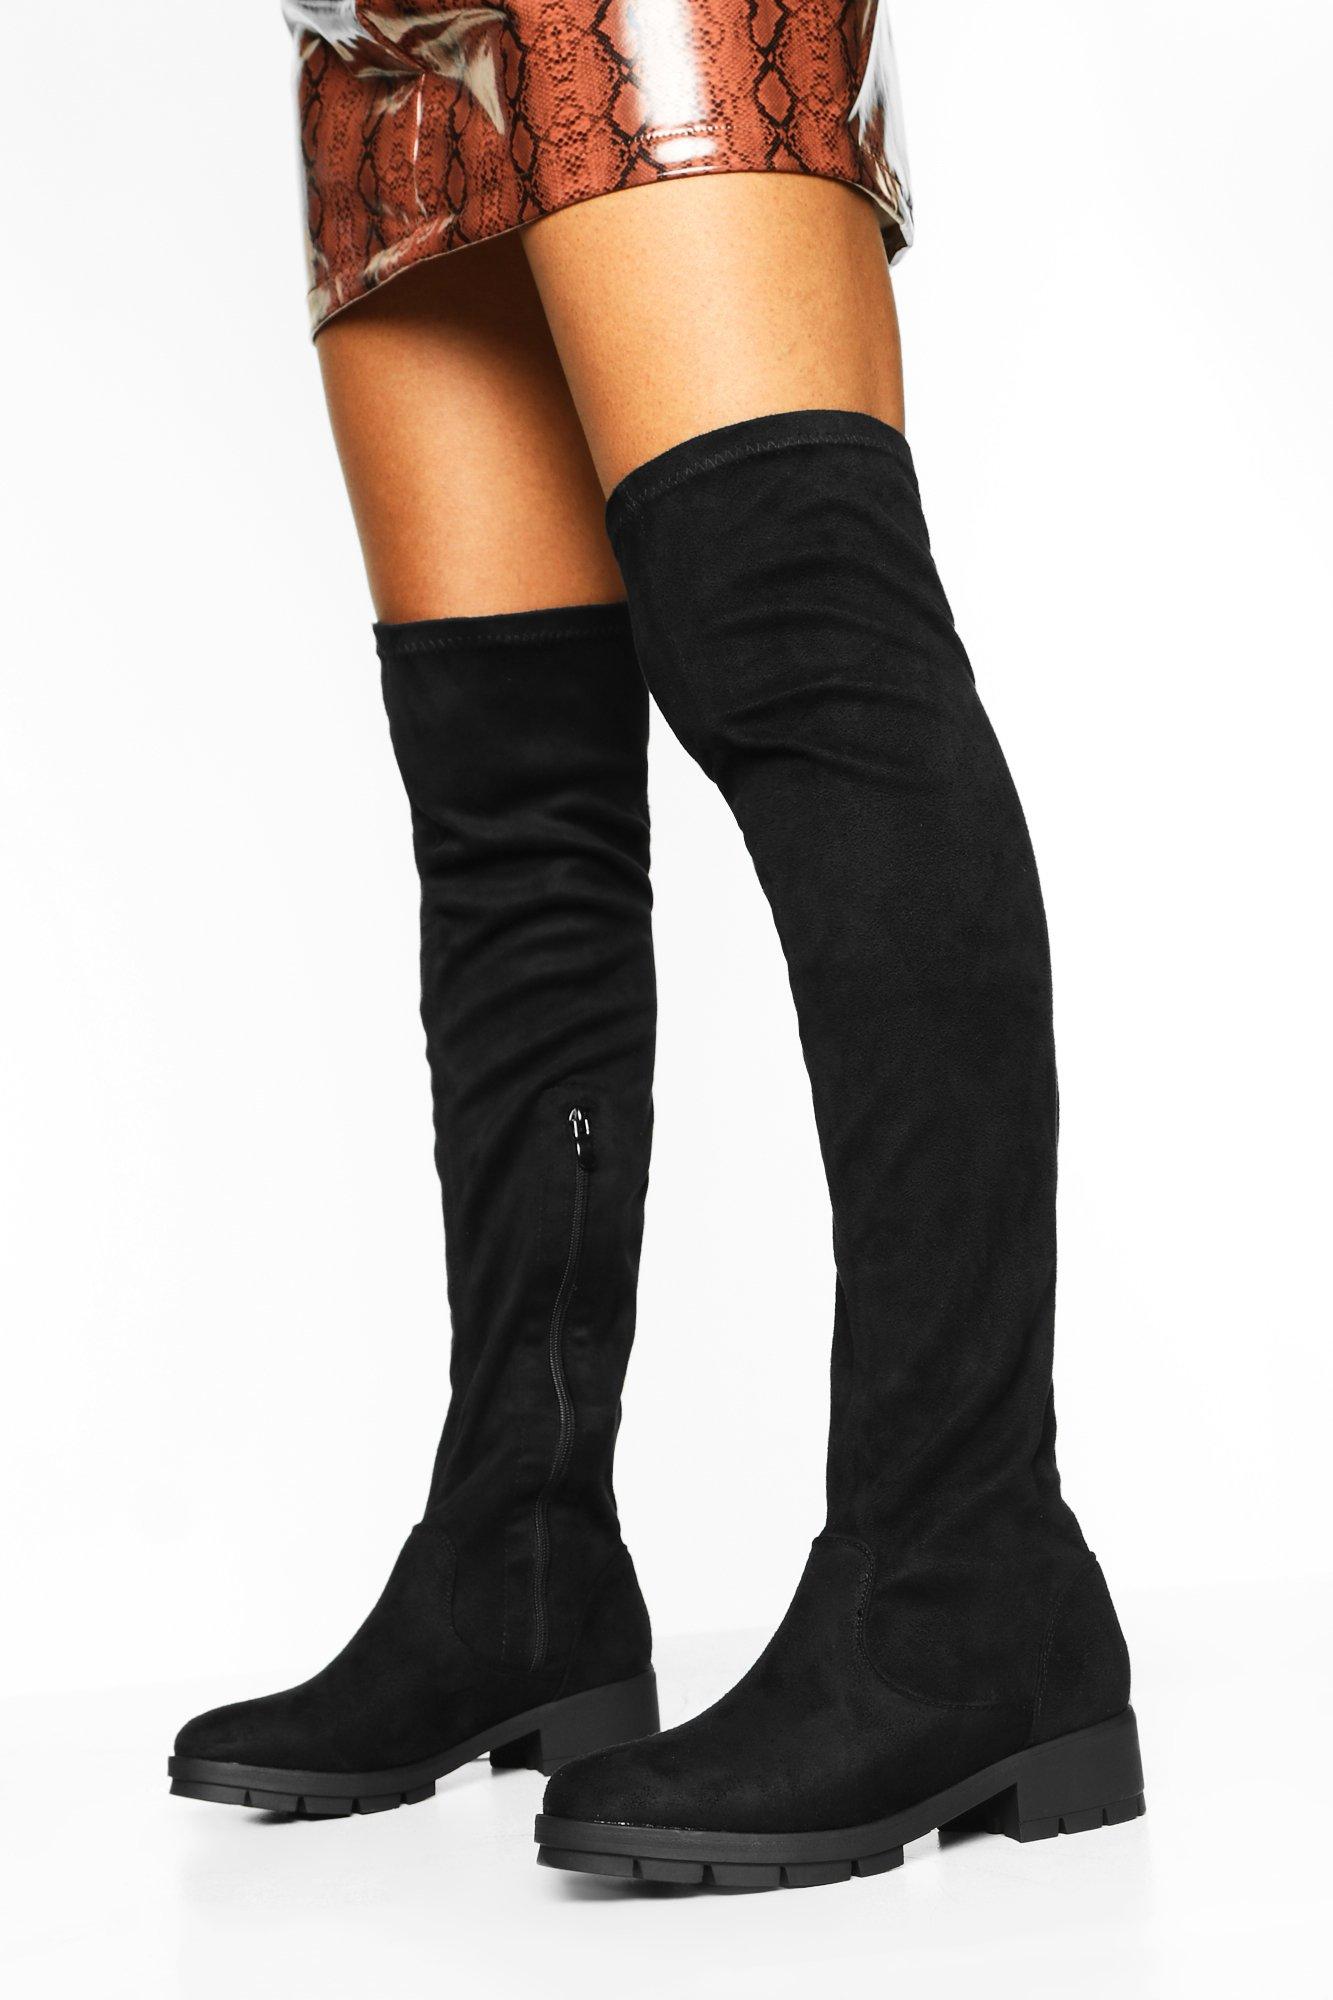 Knee High, Over Knee & Thigh High Boots: Black/Gray Suede Long Boots